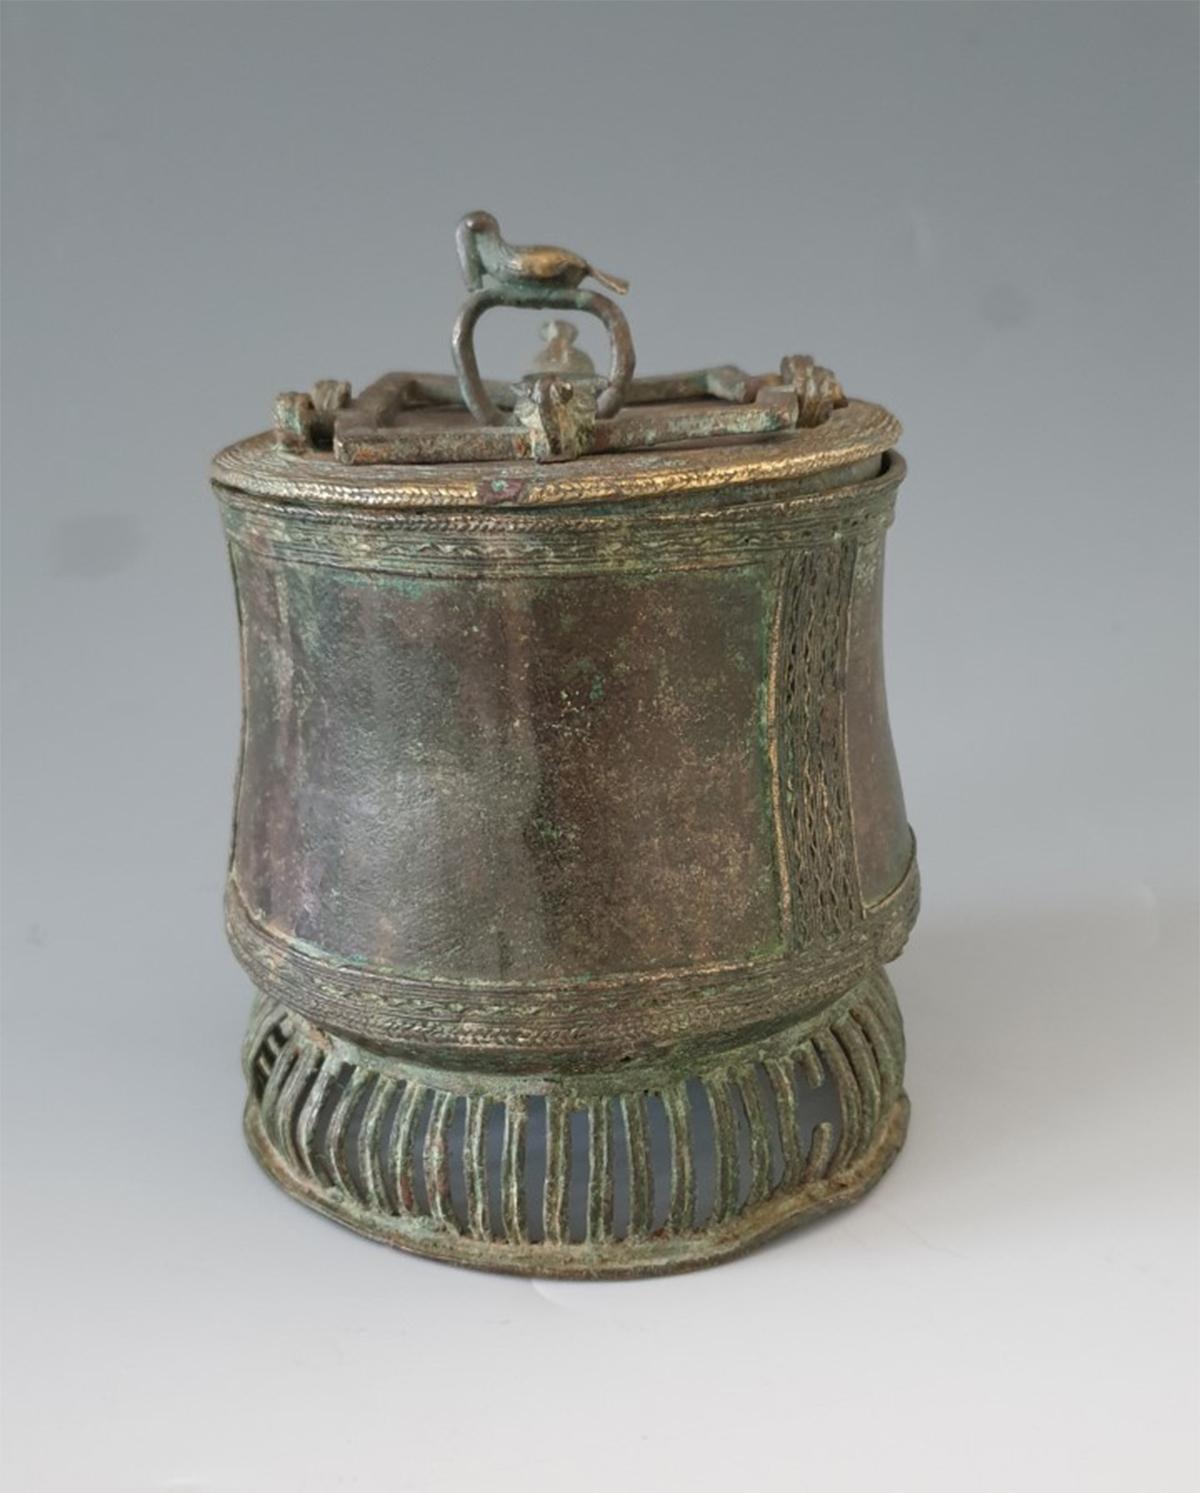 Fine Ashante bronze Kuduo.
The Ashanti Kuduo was made for storing important objects such as gold dust gold jewelry and ornaments
The Ashanti and Akan people of Ghana have been trading gold in the west African regions for millennia
Period: 18th